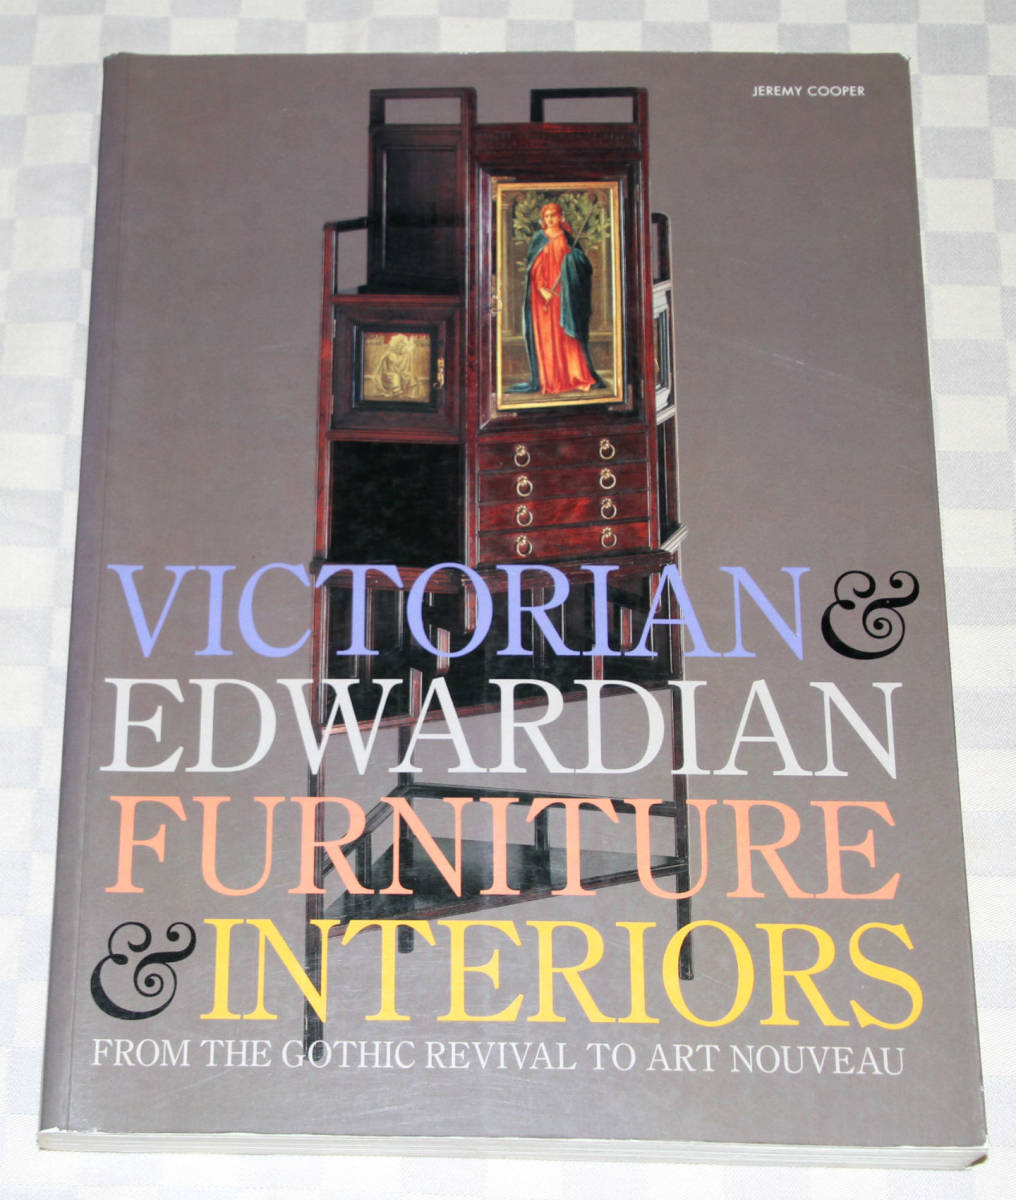  foreign book Victorian & Edwardian Furniture & Interiors: From the Gothic Revival to Art Nouveau used book@ Victoria n